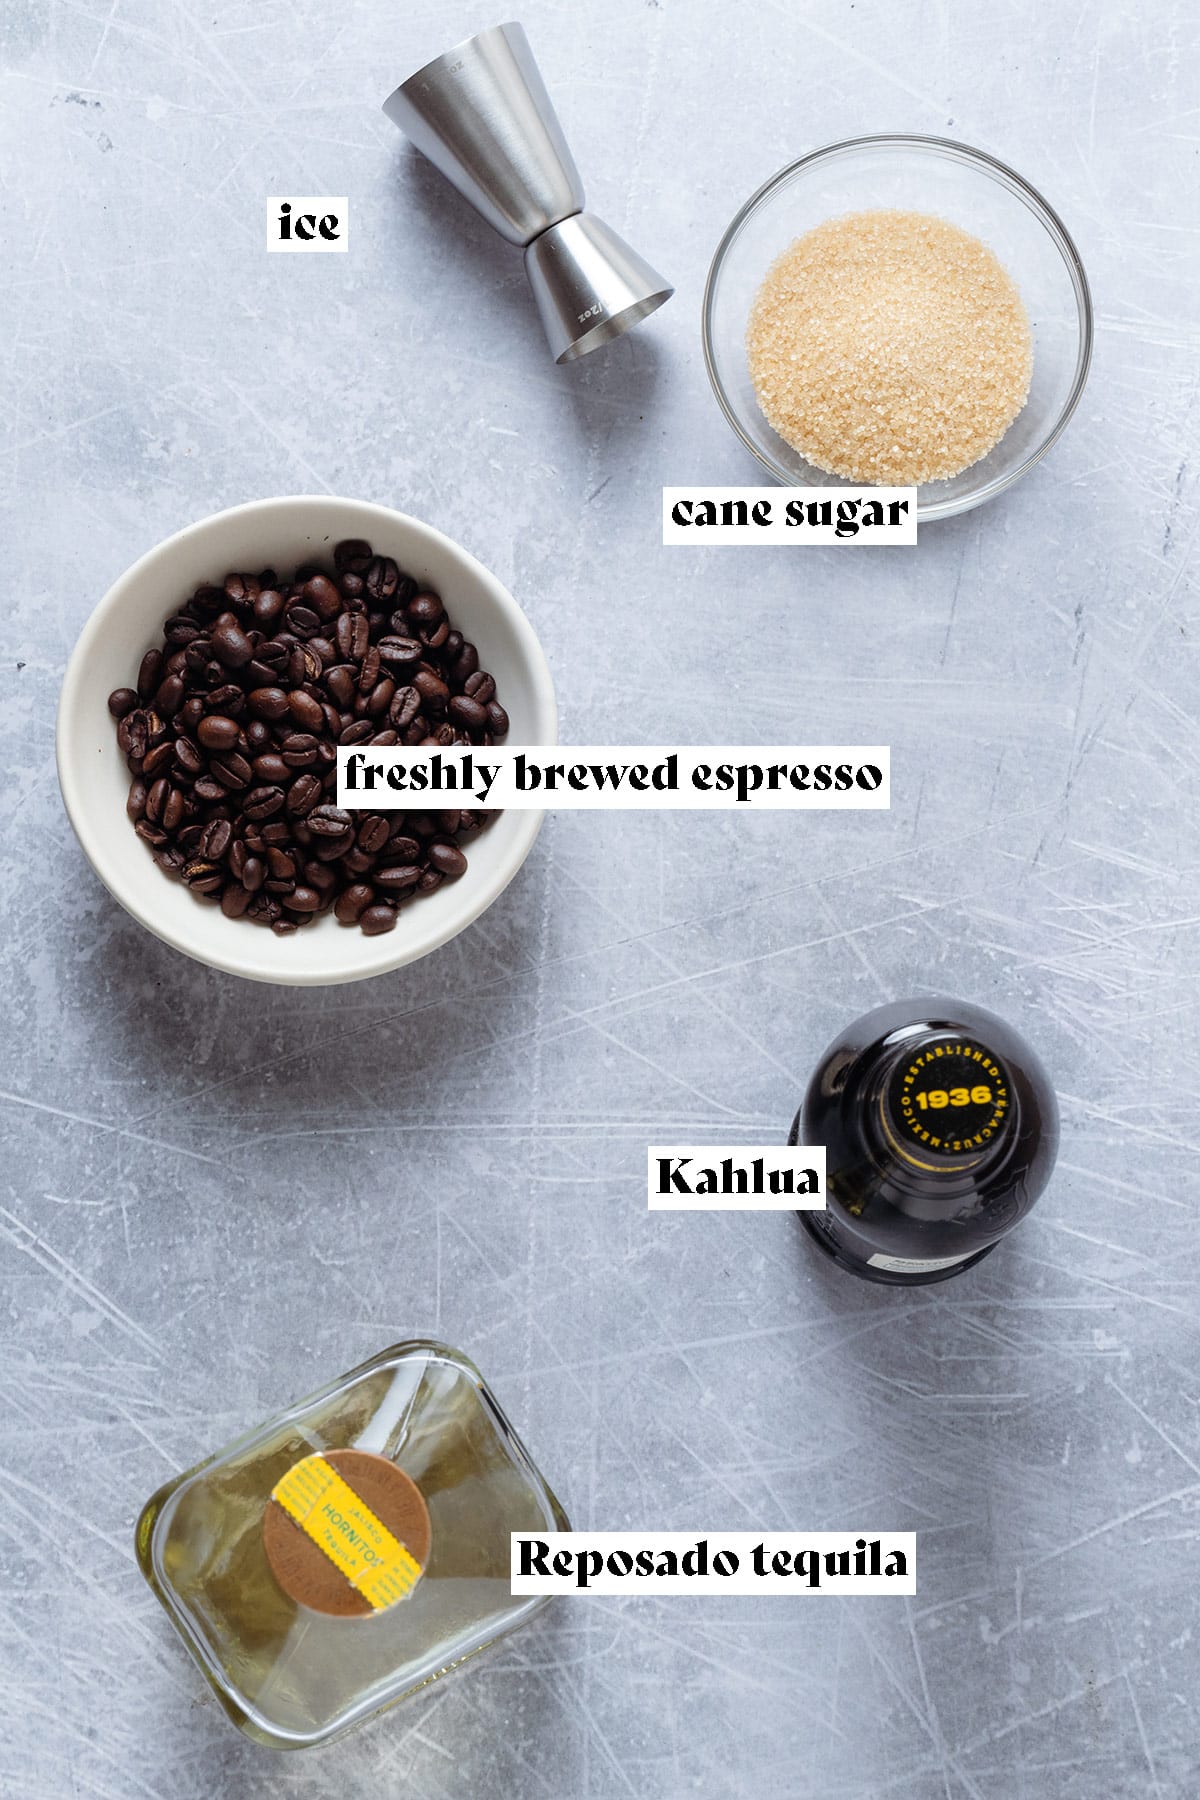 A bottle of tequila, Kahlua, cane sugar, and espresso beans laid out on a grey background.